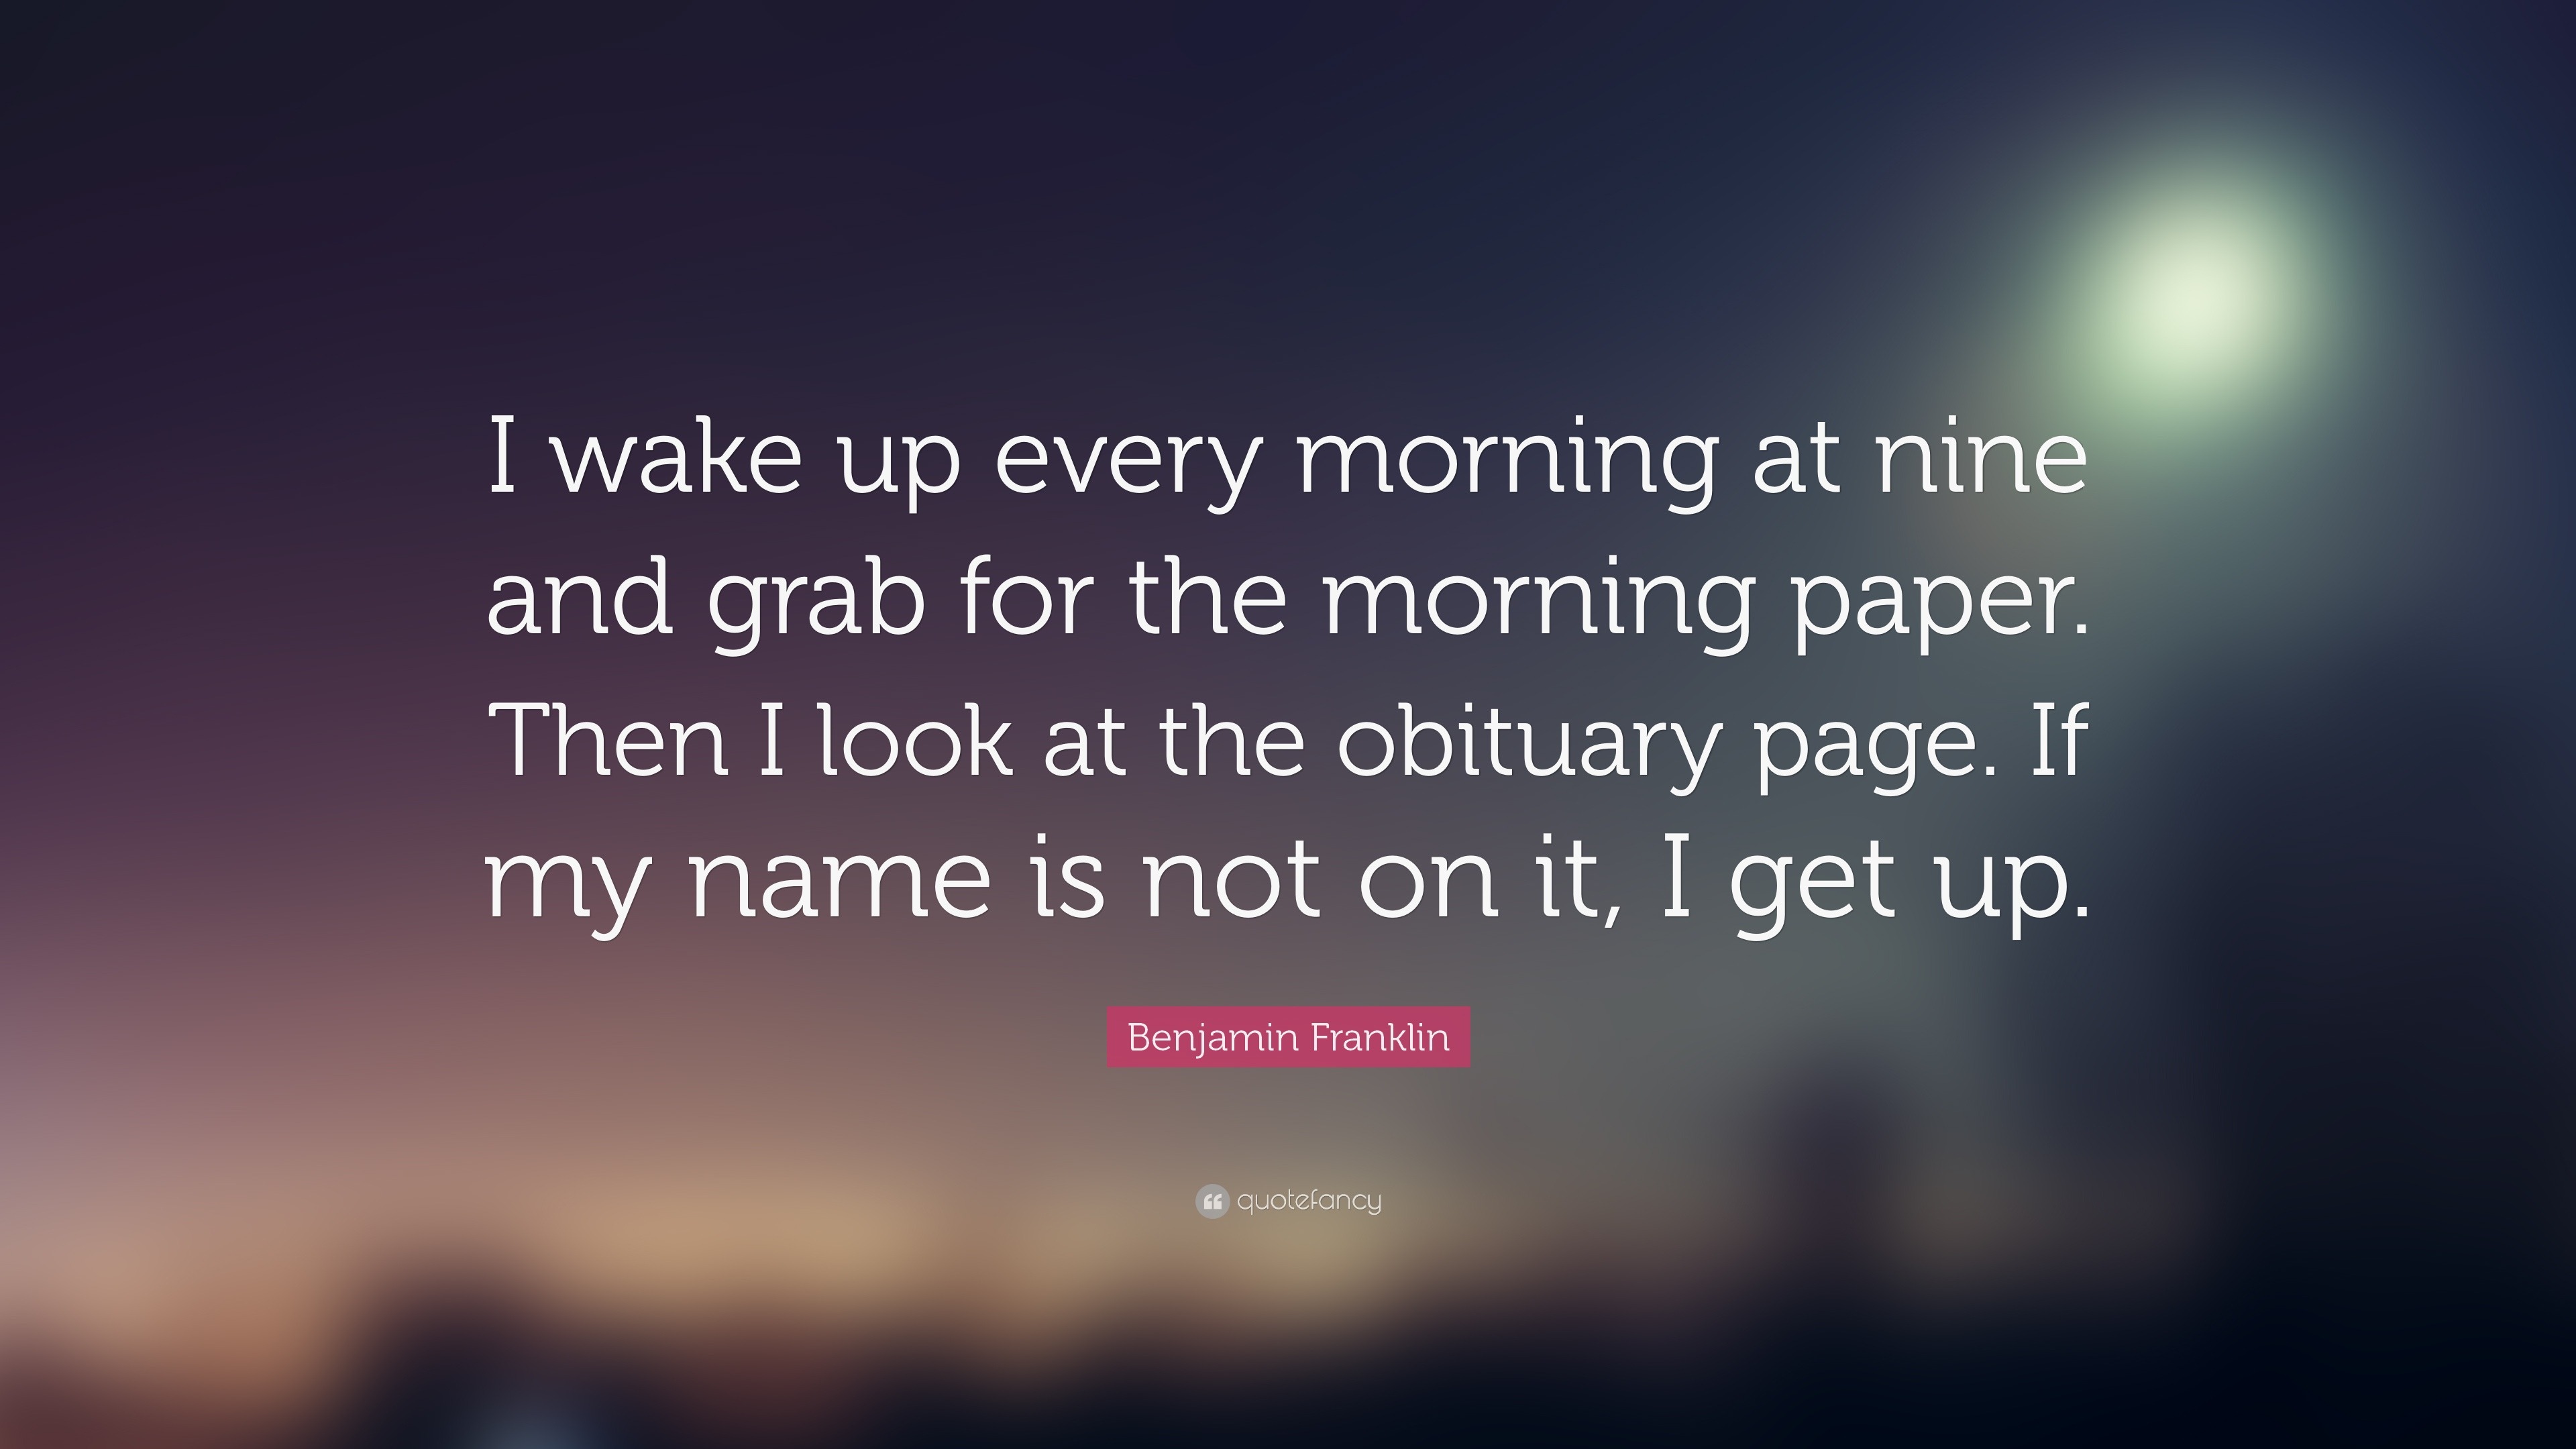 Benjamin Franklin Quote: “I wake up every morning at nine and grab for ...